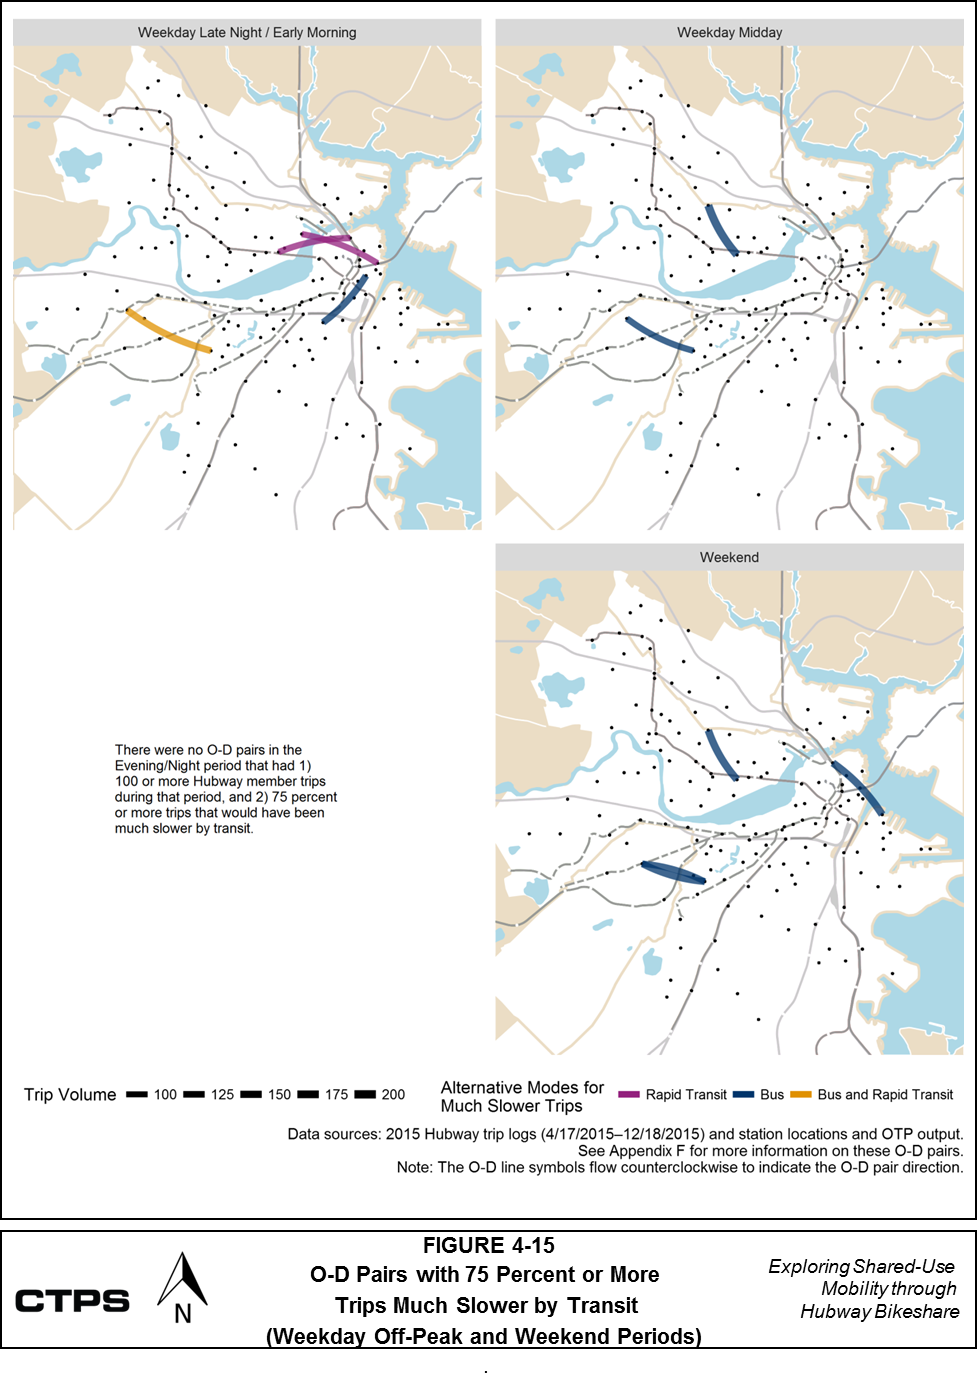 FIGURE 4-15: O-D Pairs with 75 Percent or More Trips Much Slower by Transit (Weekday Off-Peak and Weekend Periods): This series of three maps shows origin-destination (O-D) pairs of Hubway member trips. The first shows O-D pairs during the weekday late night/early morning period, the second shows O-D pairs during the weekday midday period, and the third shows O-D pairs during weekend days. . These O-D pairs are classified according to their trip volume, the relevant modes in the alternate transit itineraries generated by Open Trip Planner (OTP). At least 75 percent of the trips in these pairs were faster or comparable in travel time by transit. More information about these O-D pairs is available in Appendix F. 